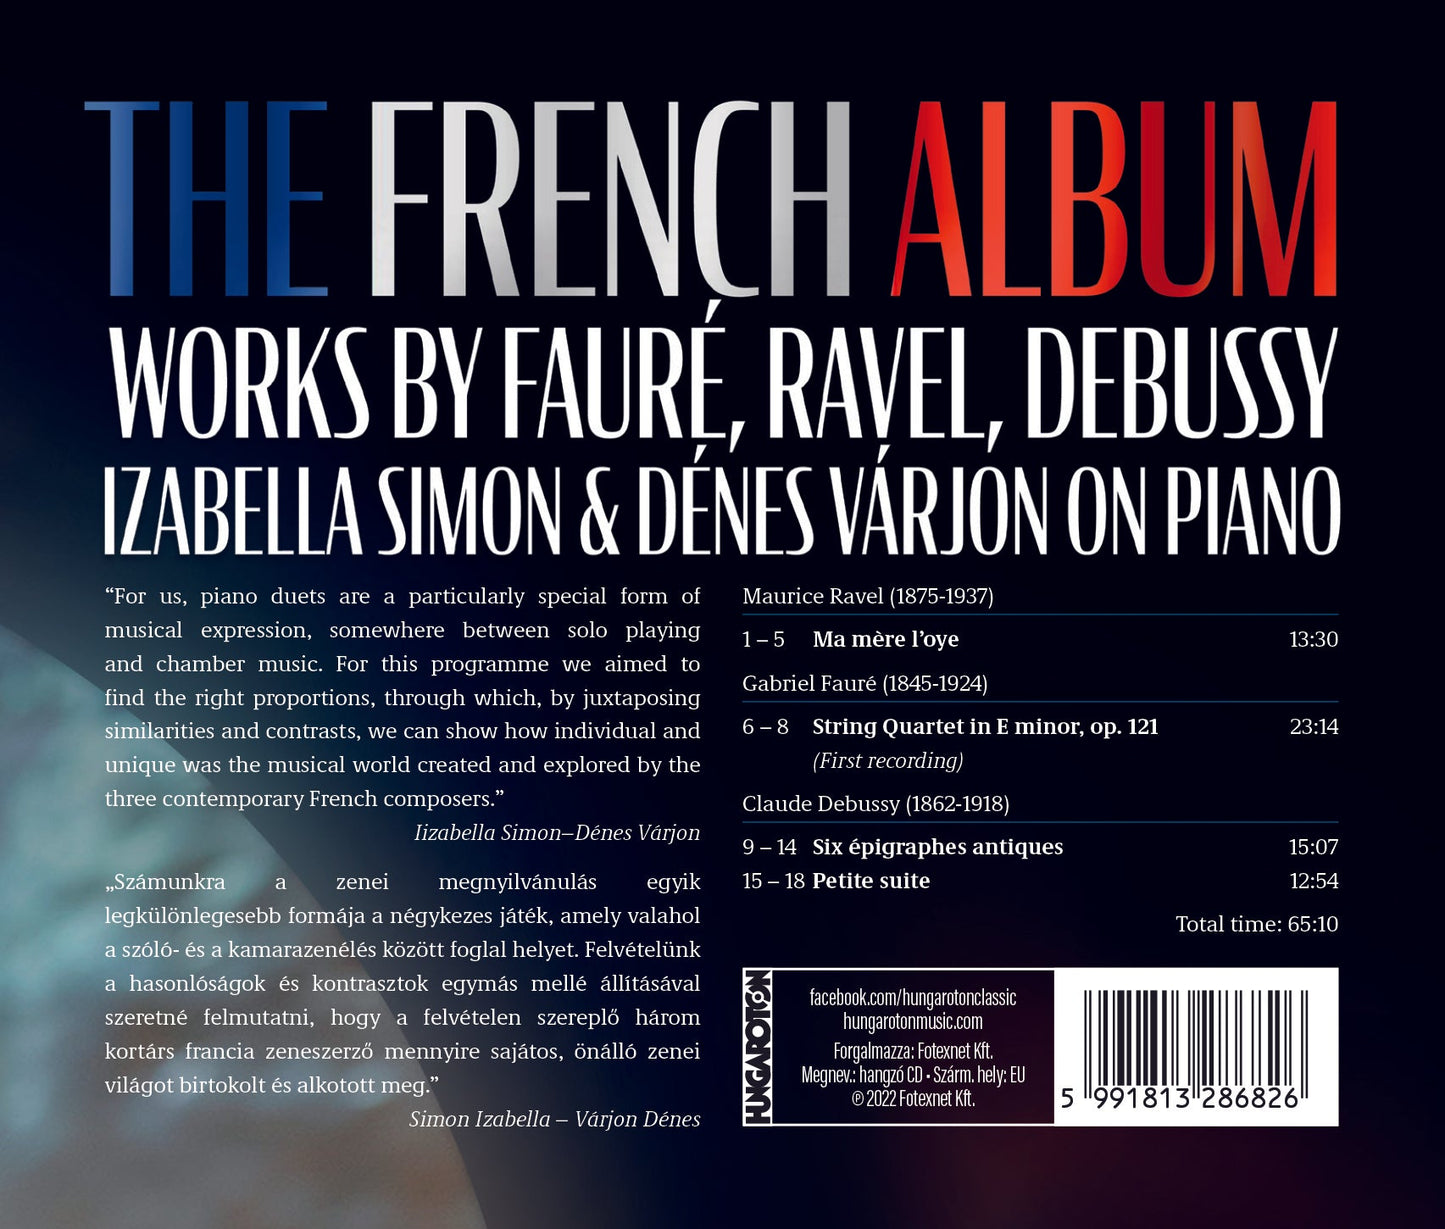 Debussy, Faure & Ravel: The French Album